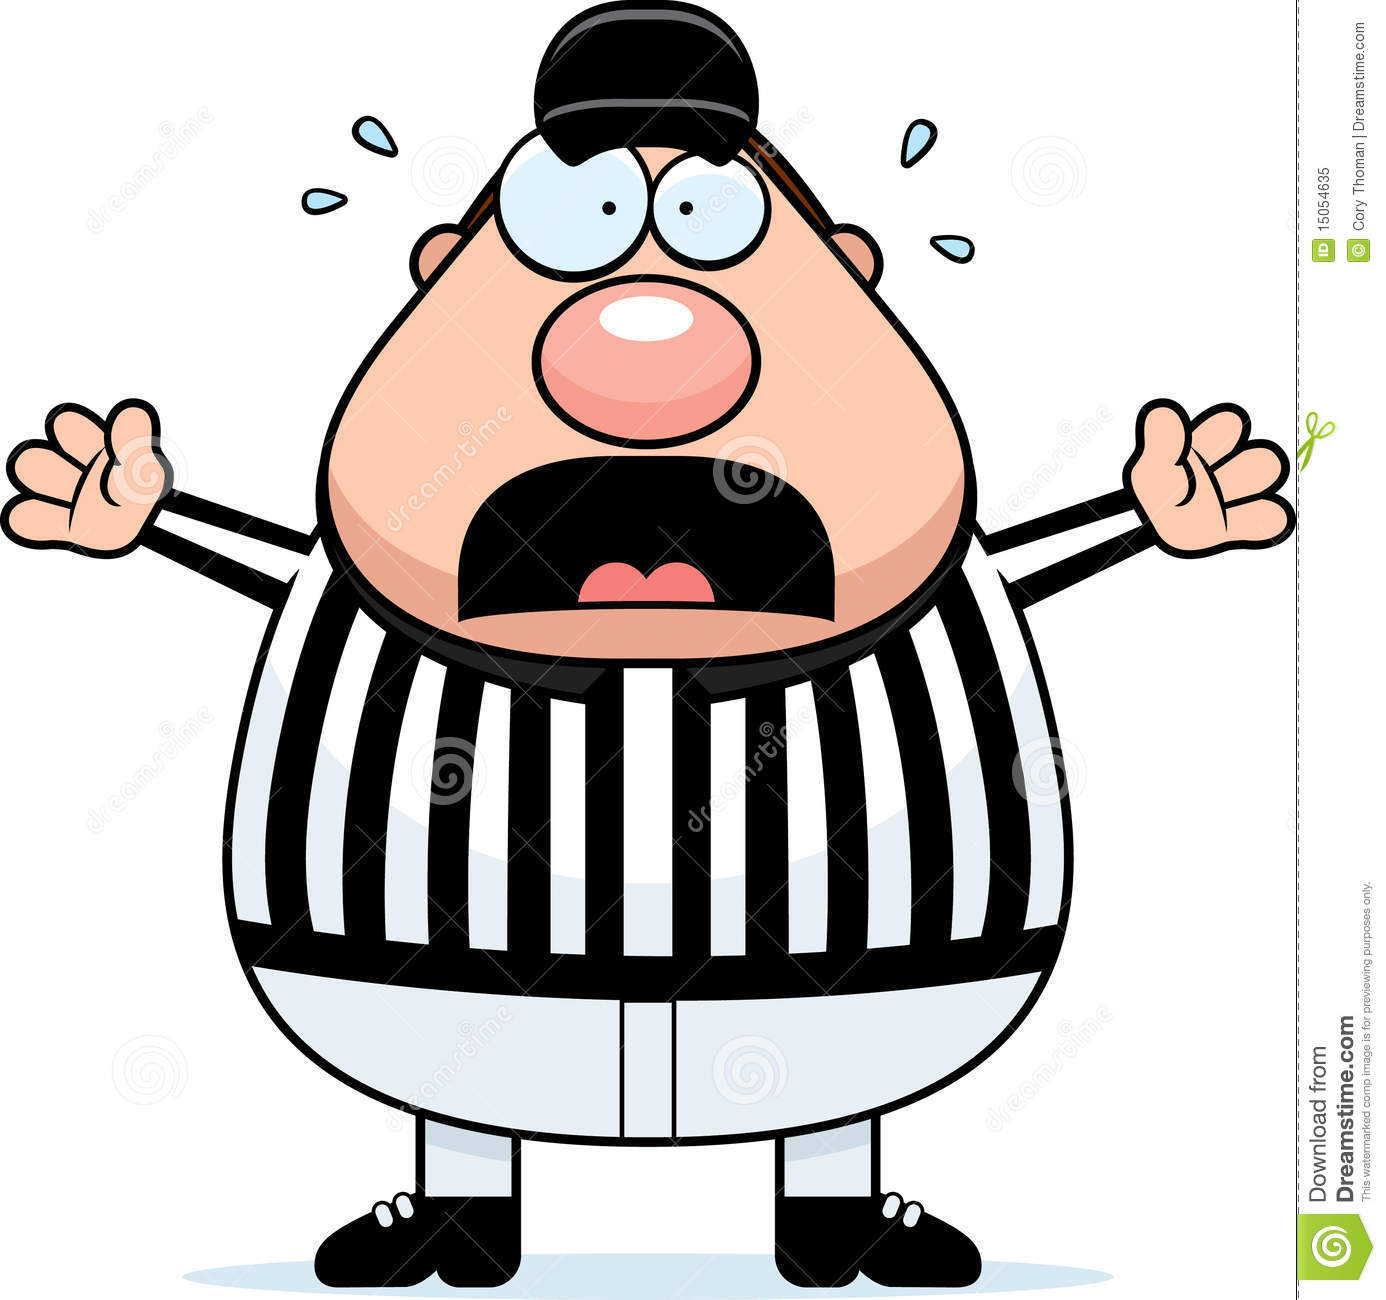 Scared Referee Royalty Free Stock Photo